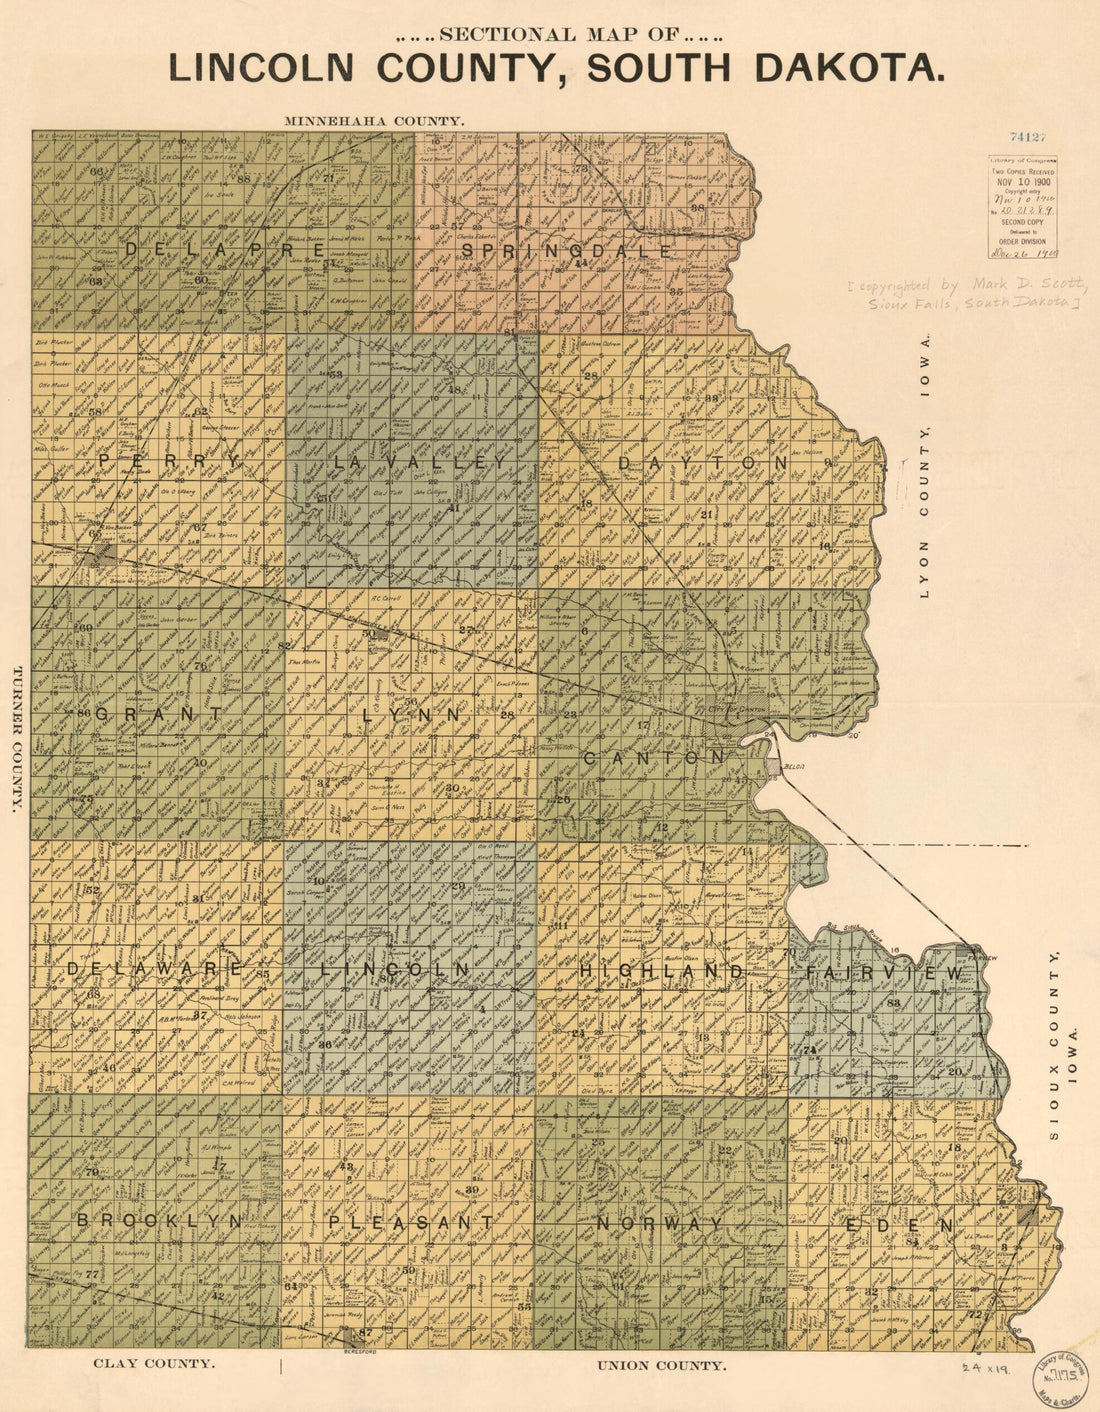 This old map of Sectional Map of Lincoln County, South Dakota from 1899 was created by Mark D. Scott in 1899